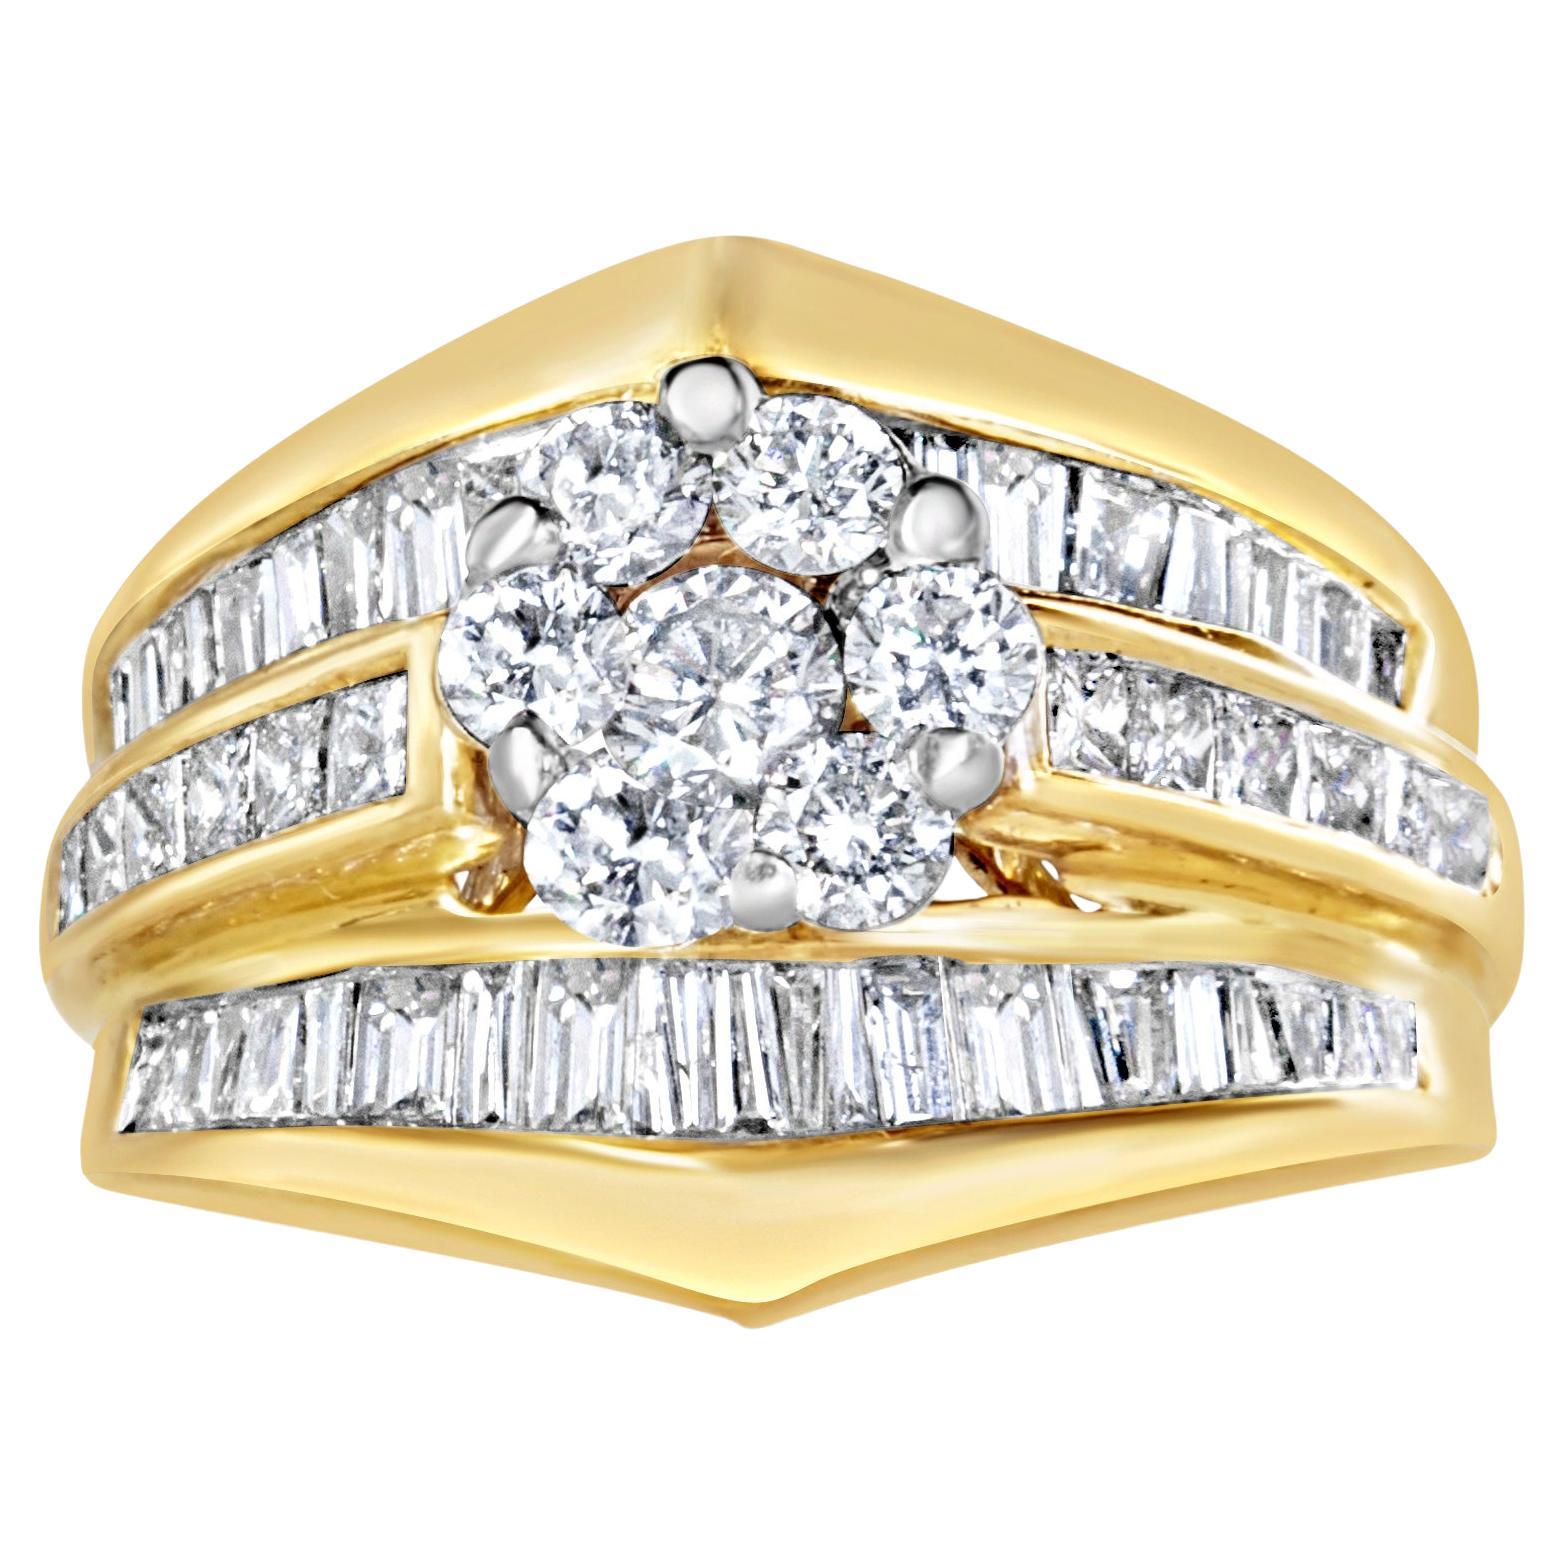 For Sale:  14K Yellow Gold 2-1/3 Carat Diamond Cluster Chevron Shaped Band Engagement Ring